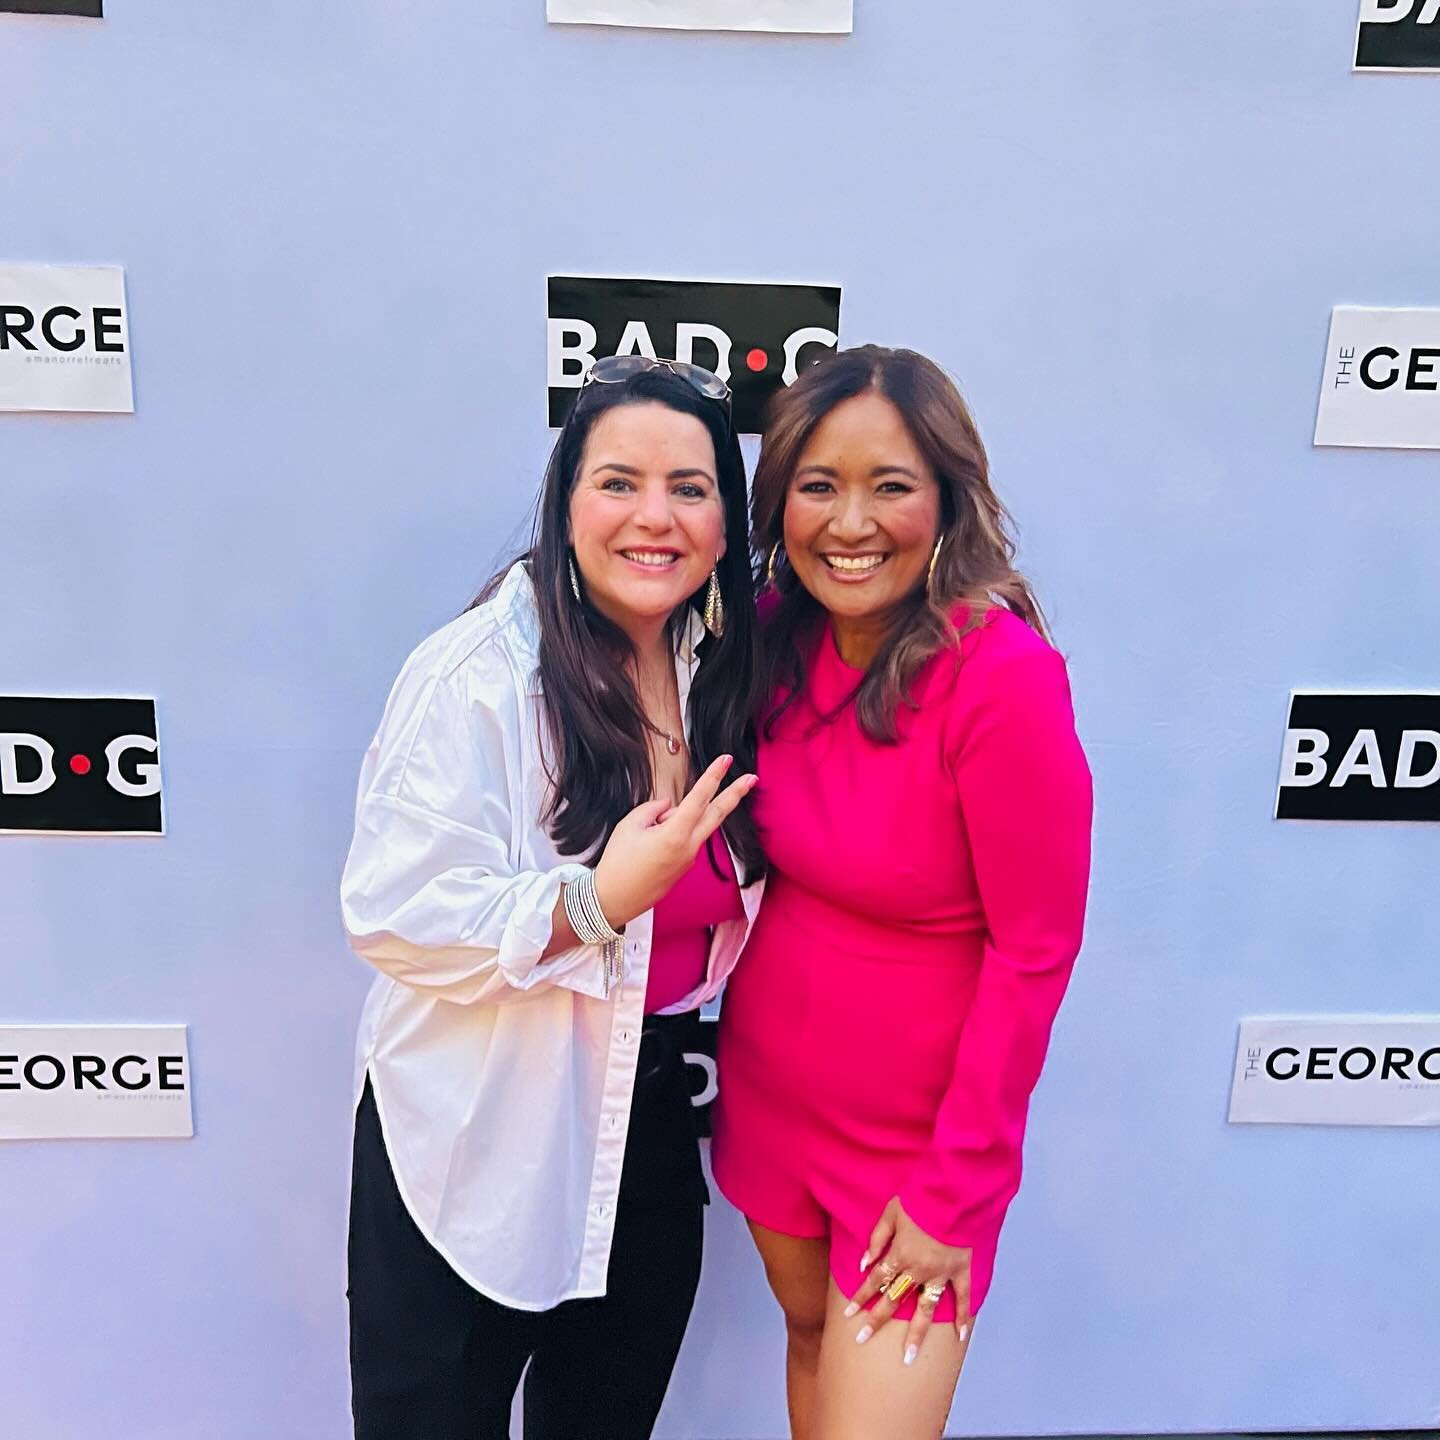 Doing Good is BadAss!! @badassdogooders 

BadAss DoGooders is a League Of Heart-Driven Entrepreneurs, Creators &amp; Changemakers On A Mission To Impact Our Communities, The World &amp; Each Other founded by real life superhero herself Seak Smith @se